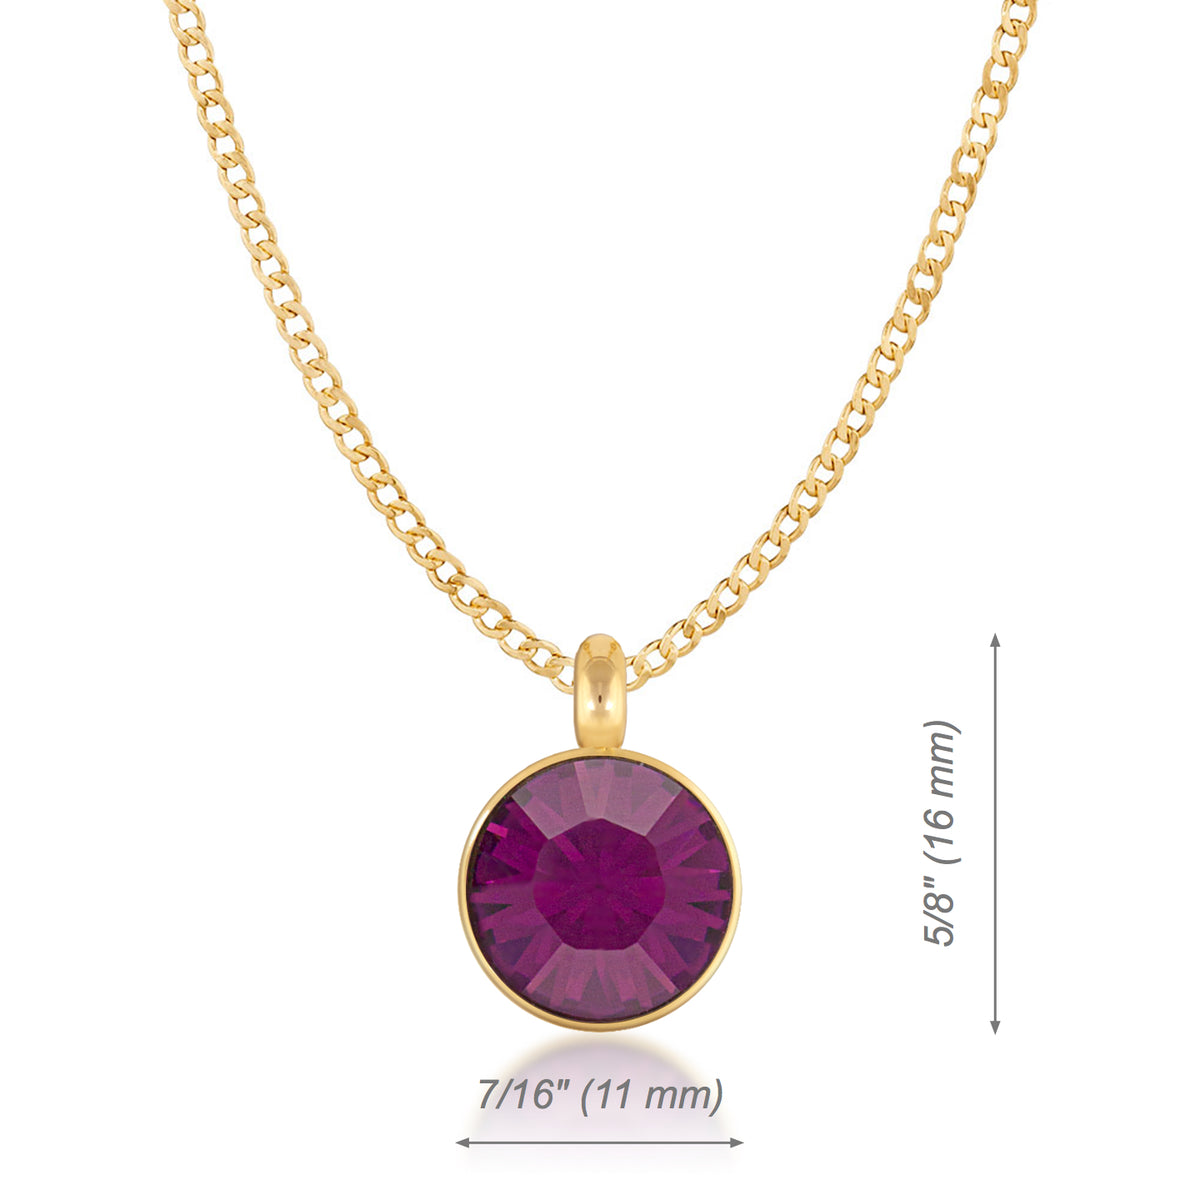 Bella Pendant Necklace with Purple Amethyst Round Crystals from Swarovski Gold Plated - Ed Heart